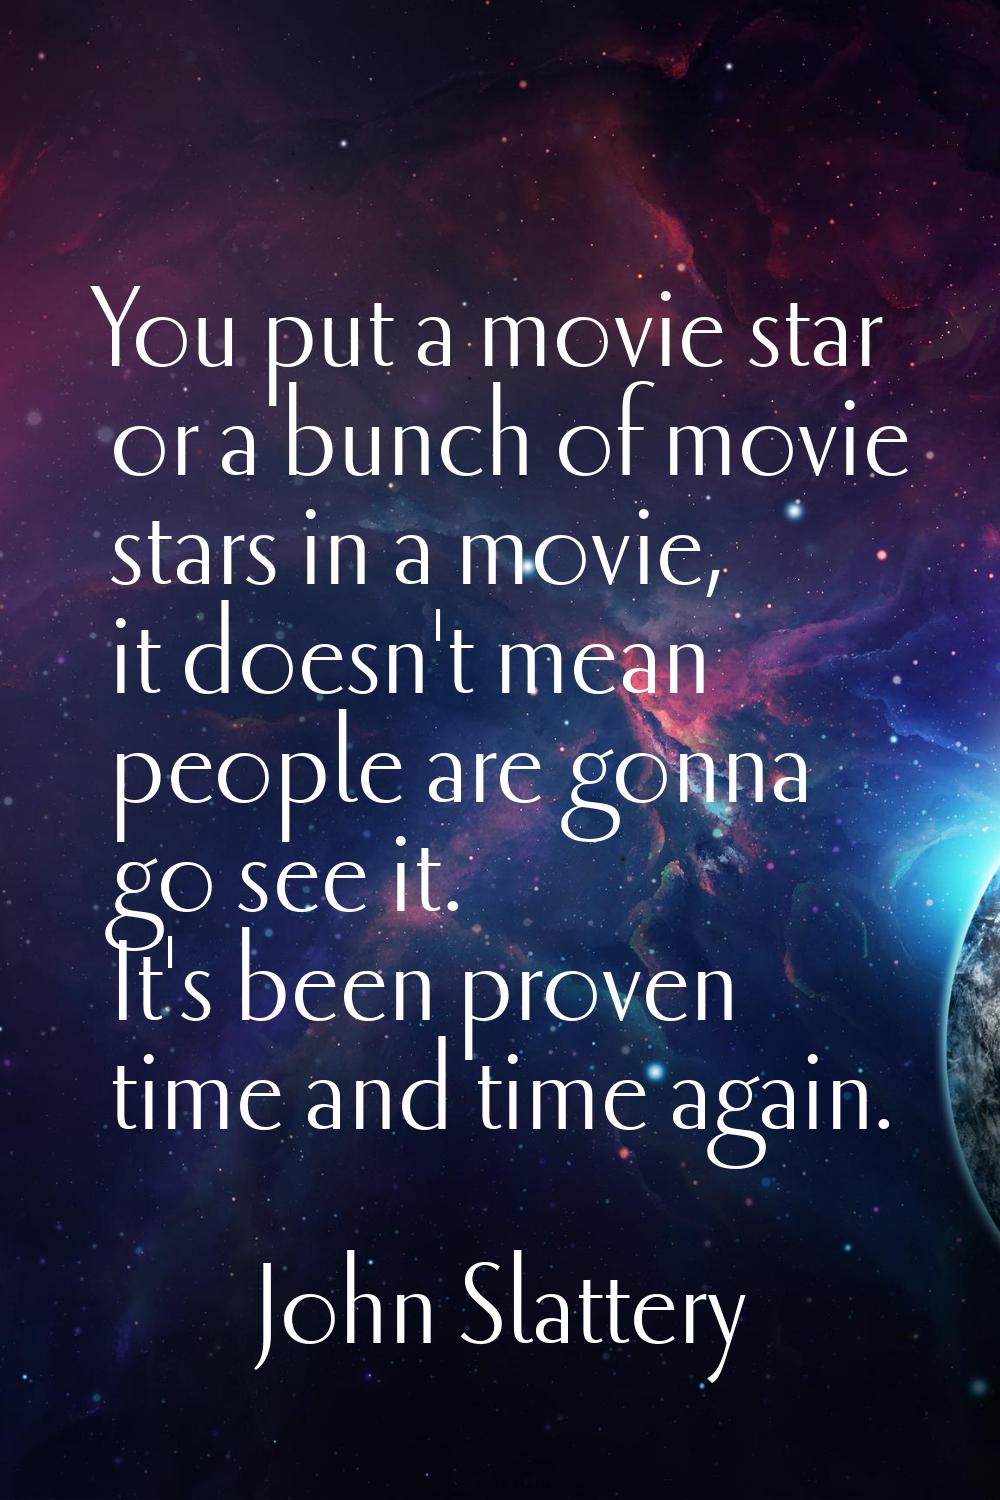 You put a movie star or a bunch of movie stars in a movie, it doesn't mean people are gonna go see 